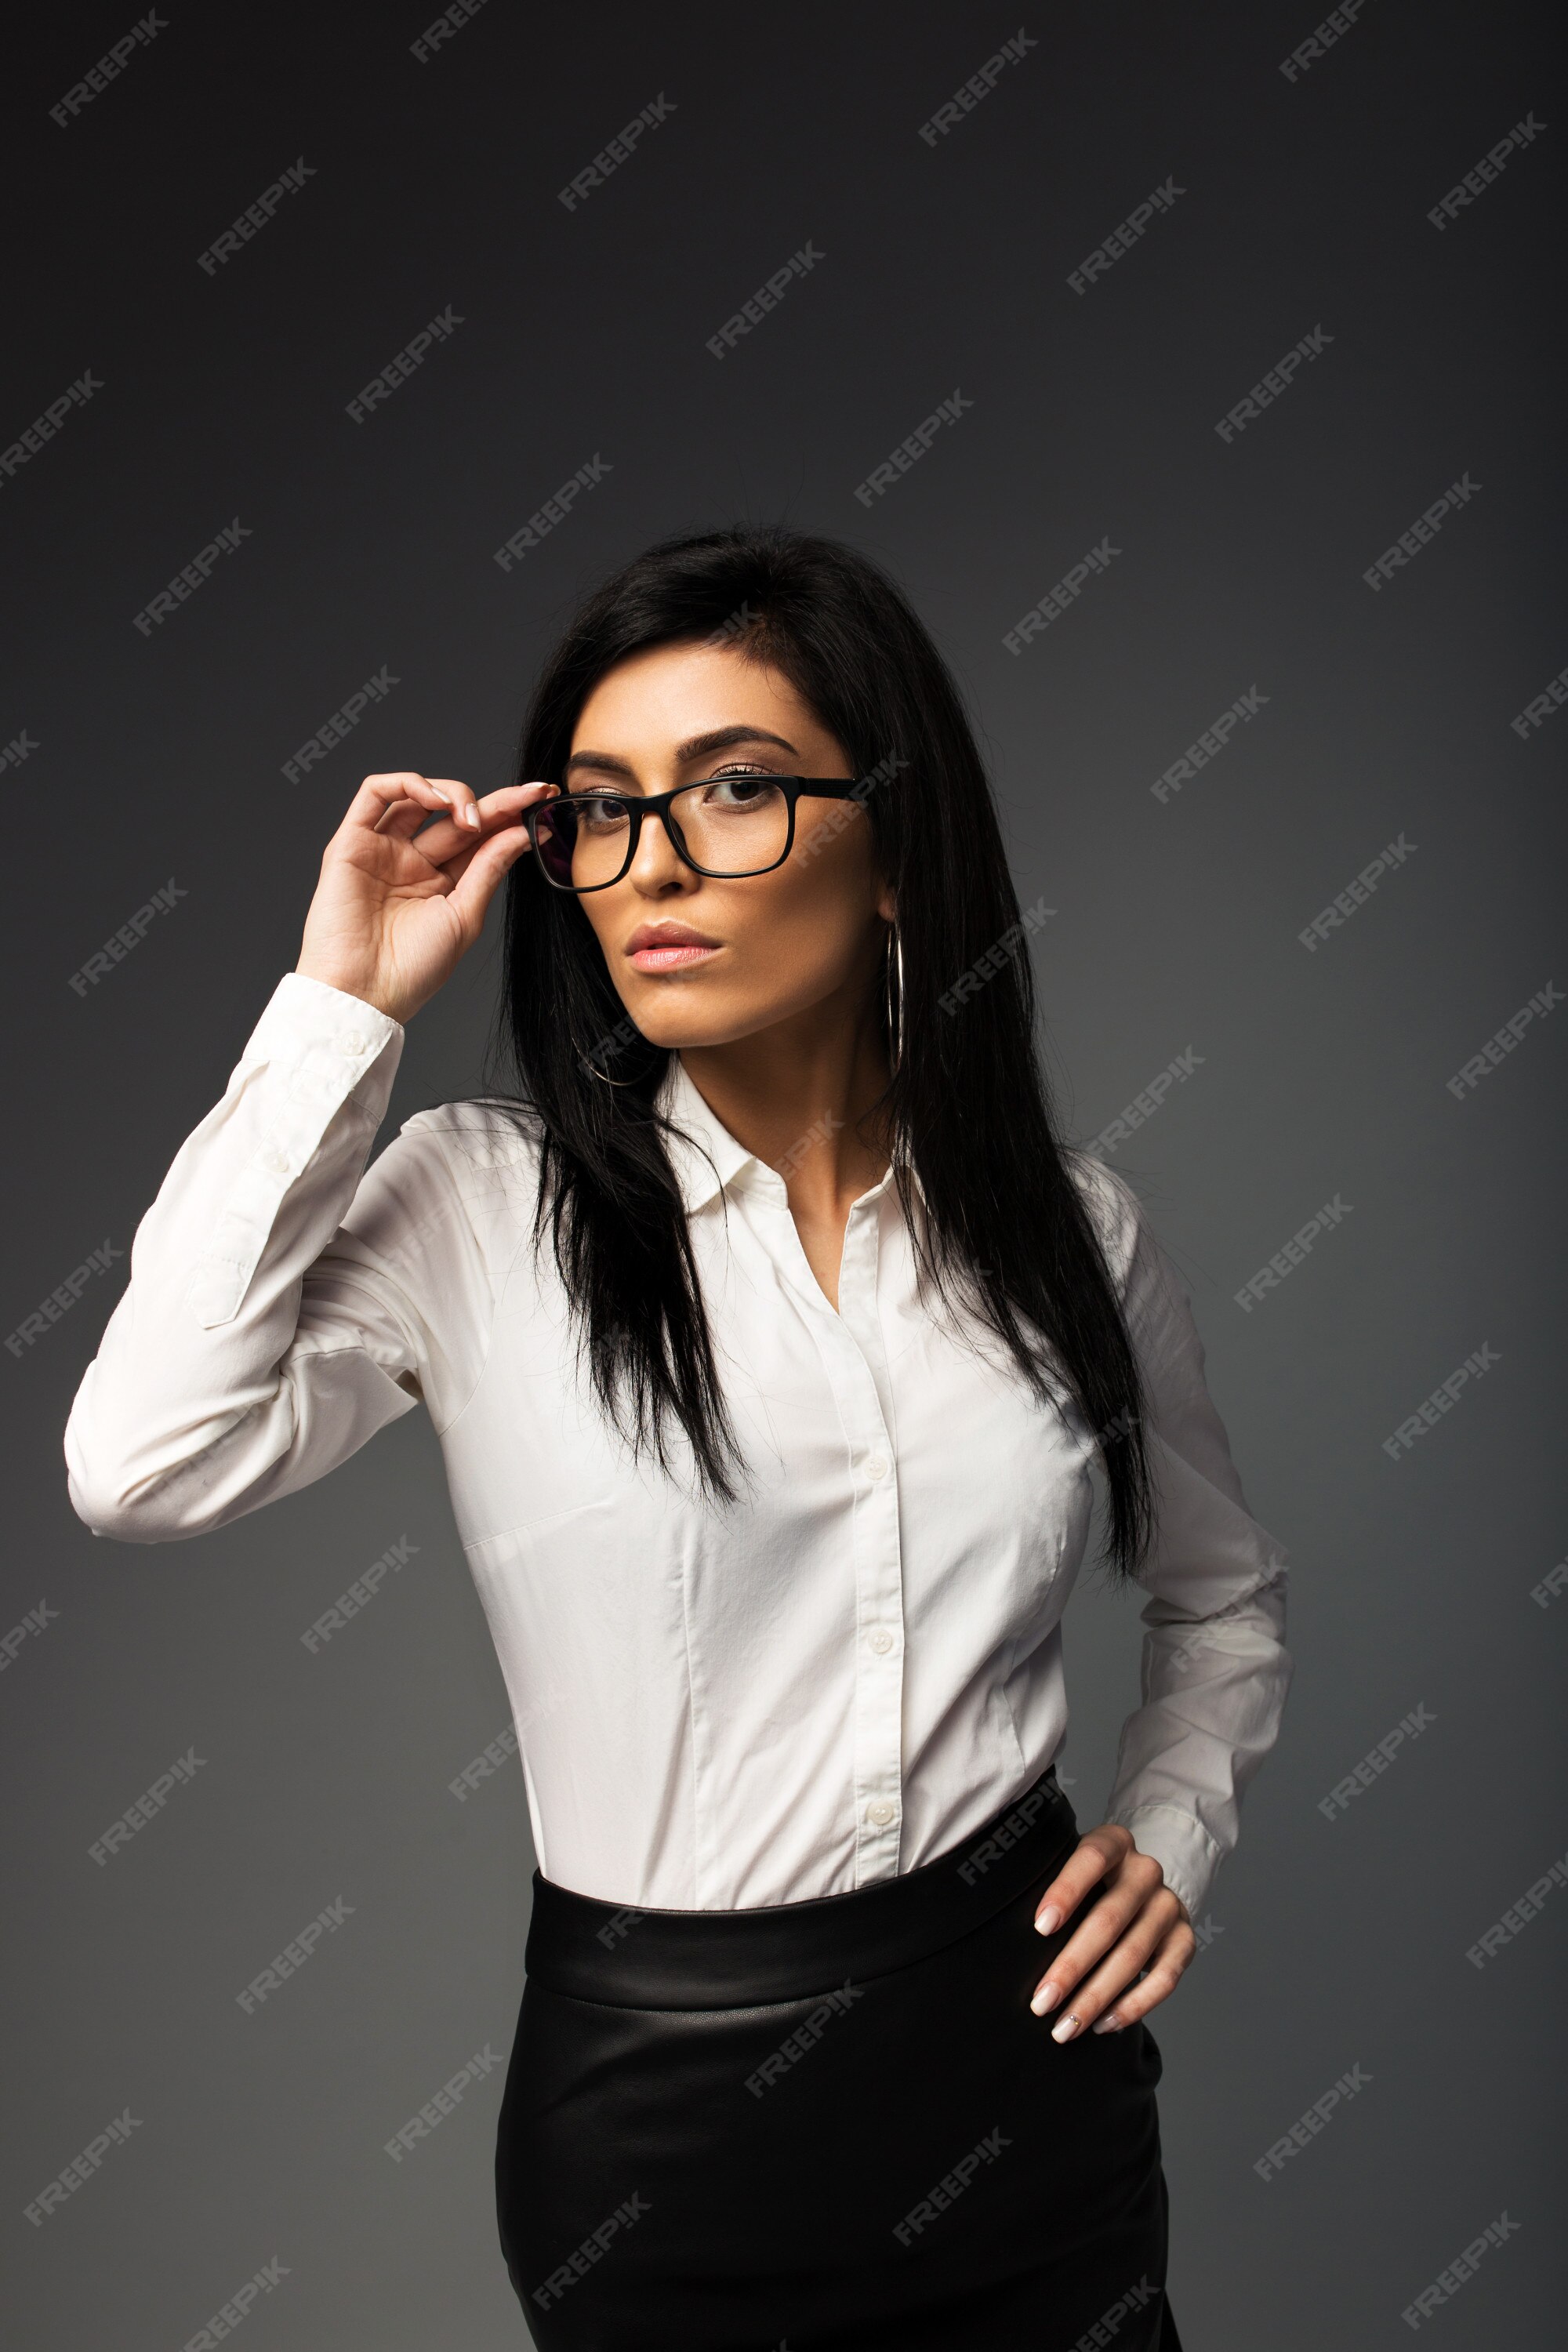 brian brakebill recommends hot brunette with glasses pic